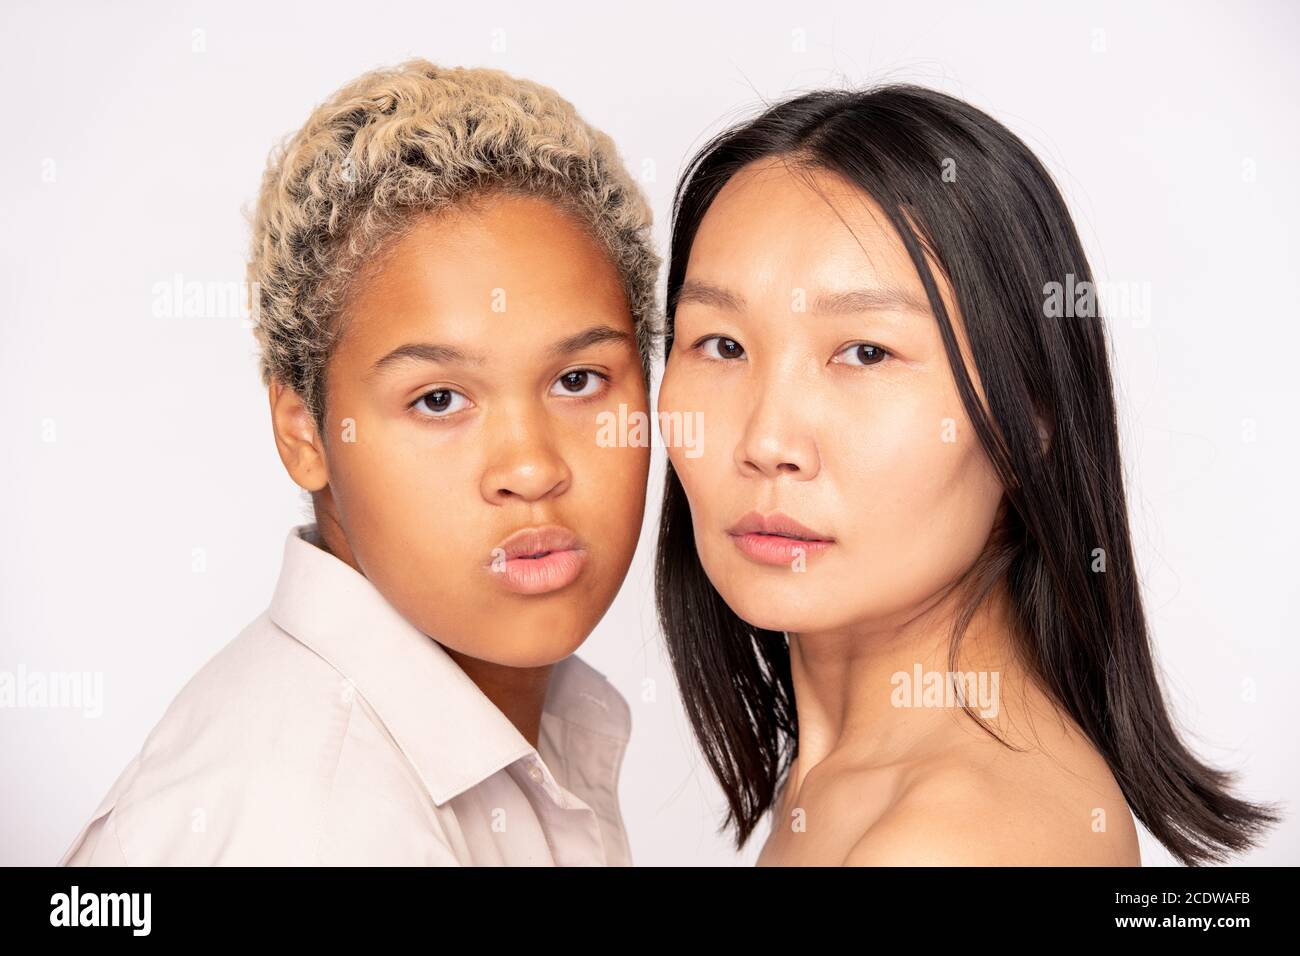 Faces of young friendly African and Asian females standing close to one another Stock Photo